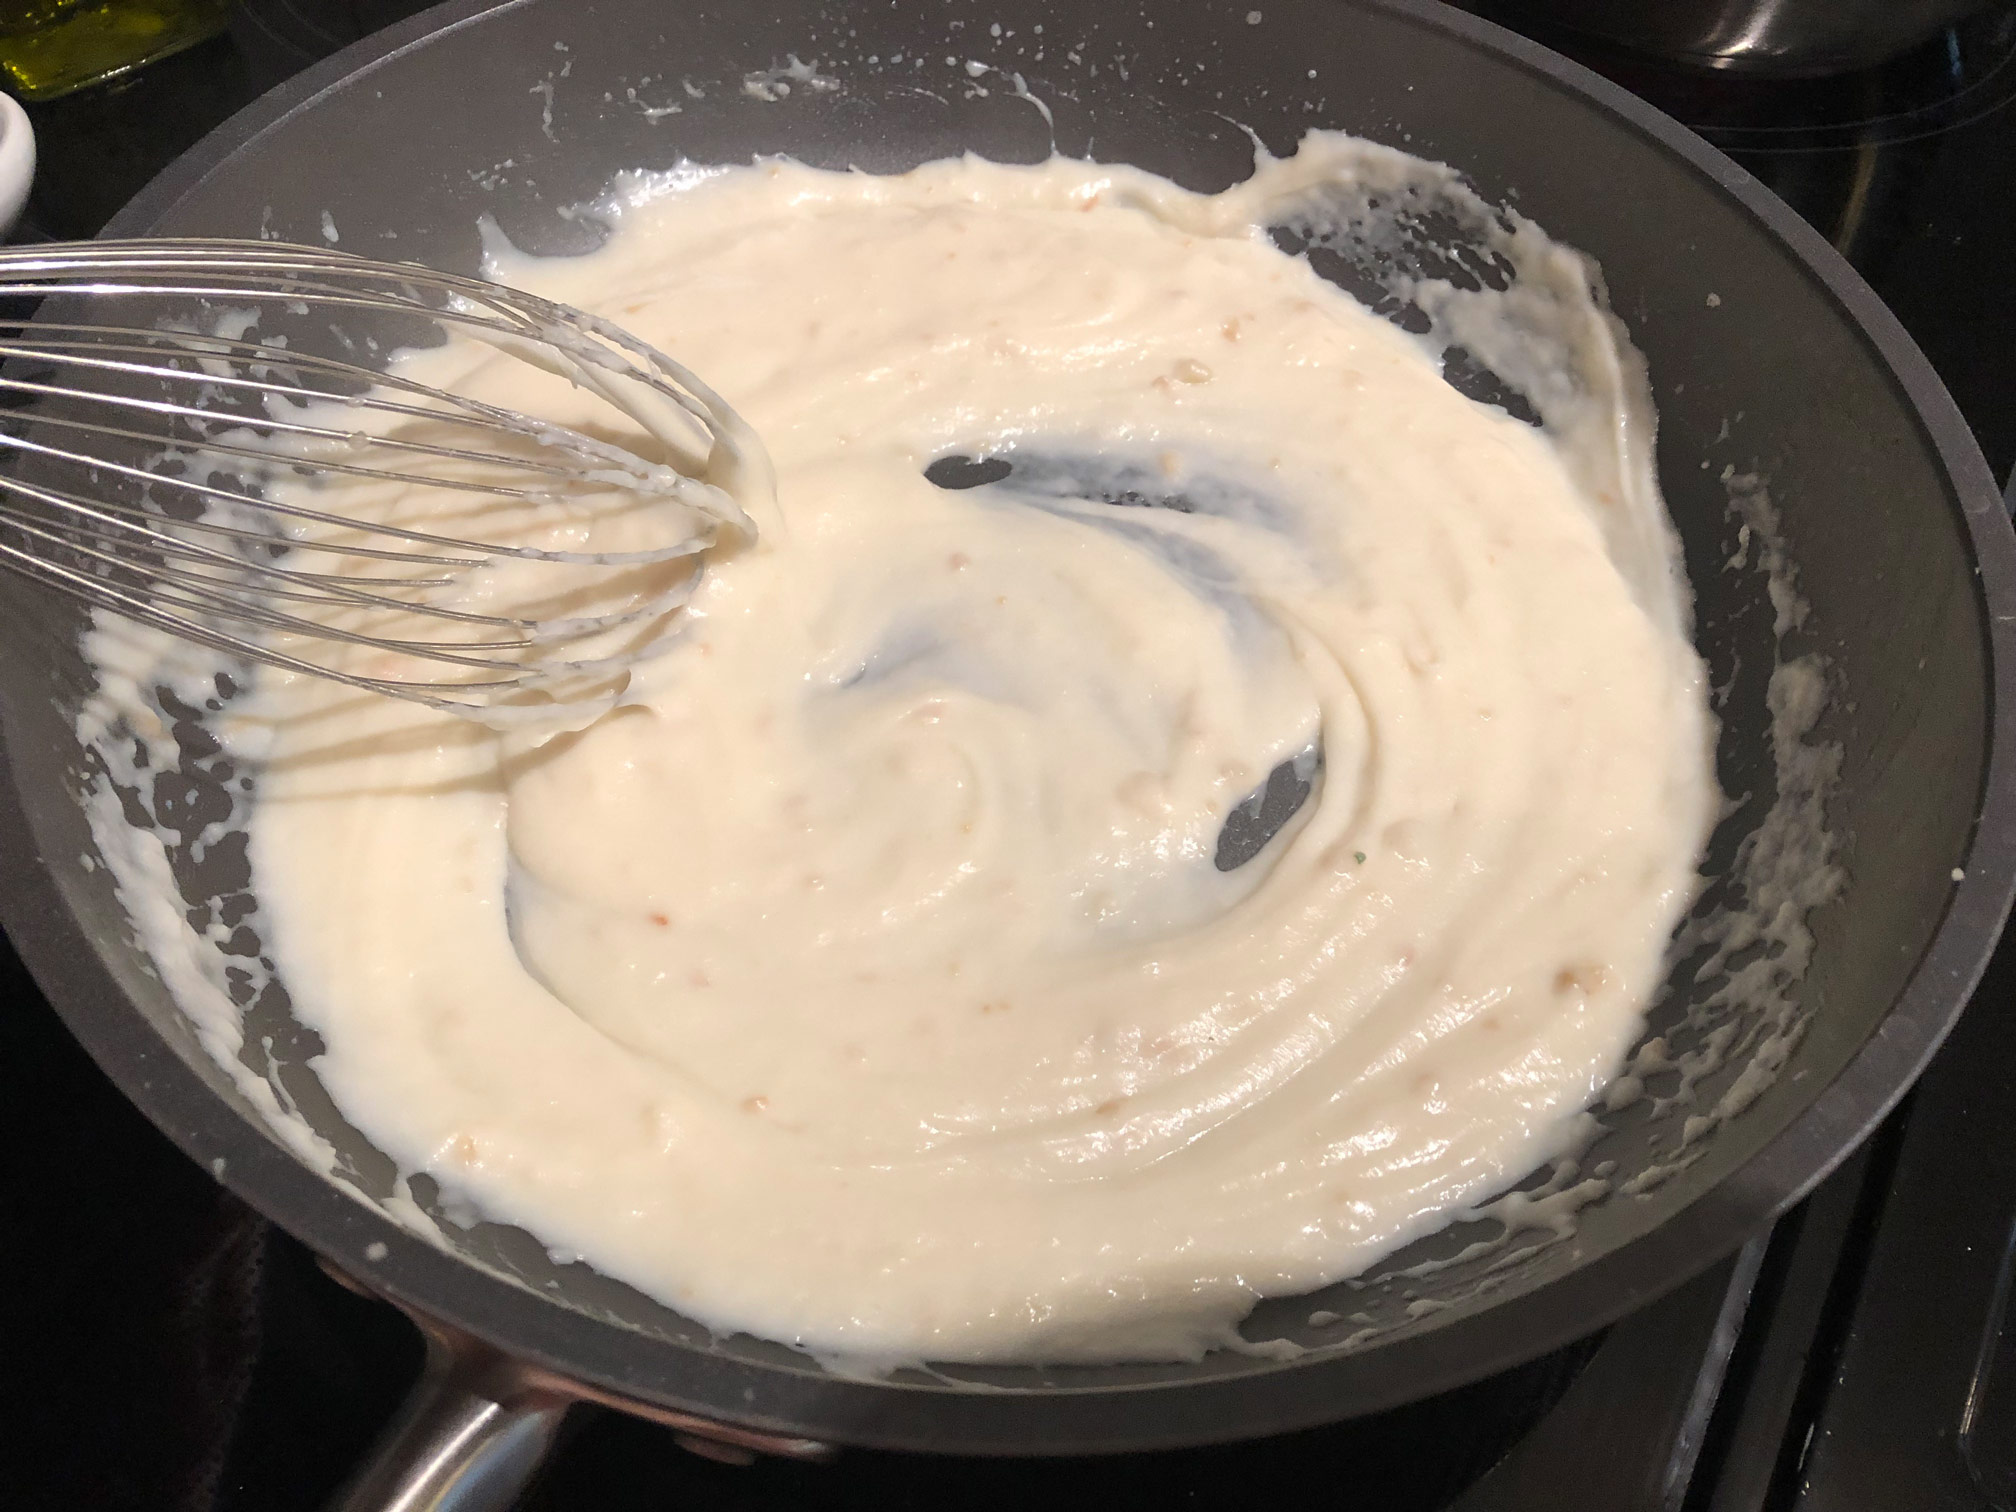 How to make alfredo sauce without cream cheese